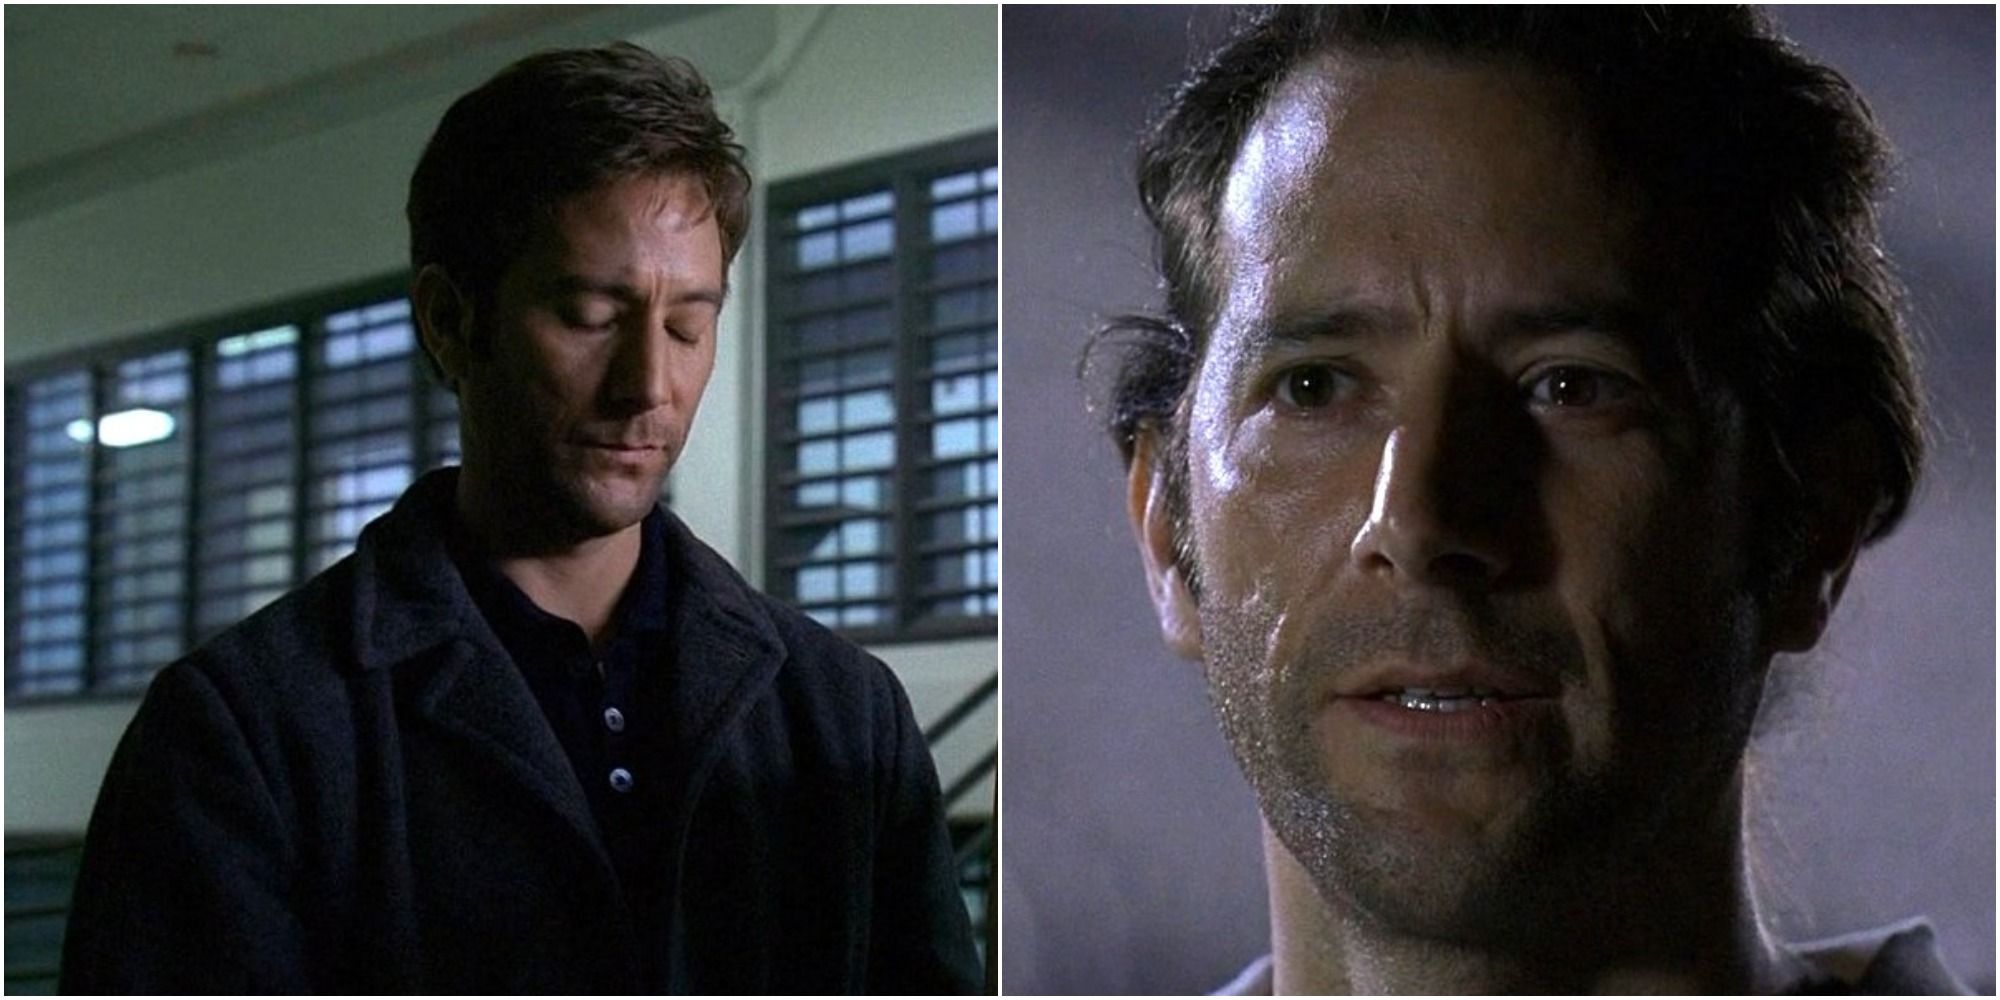 Desmond Hume from Lost